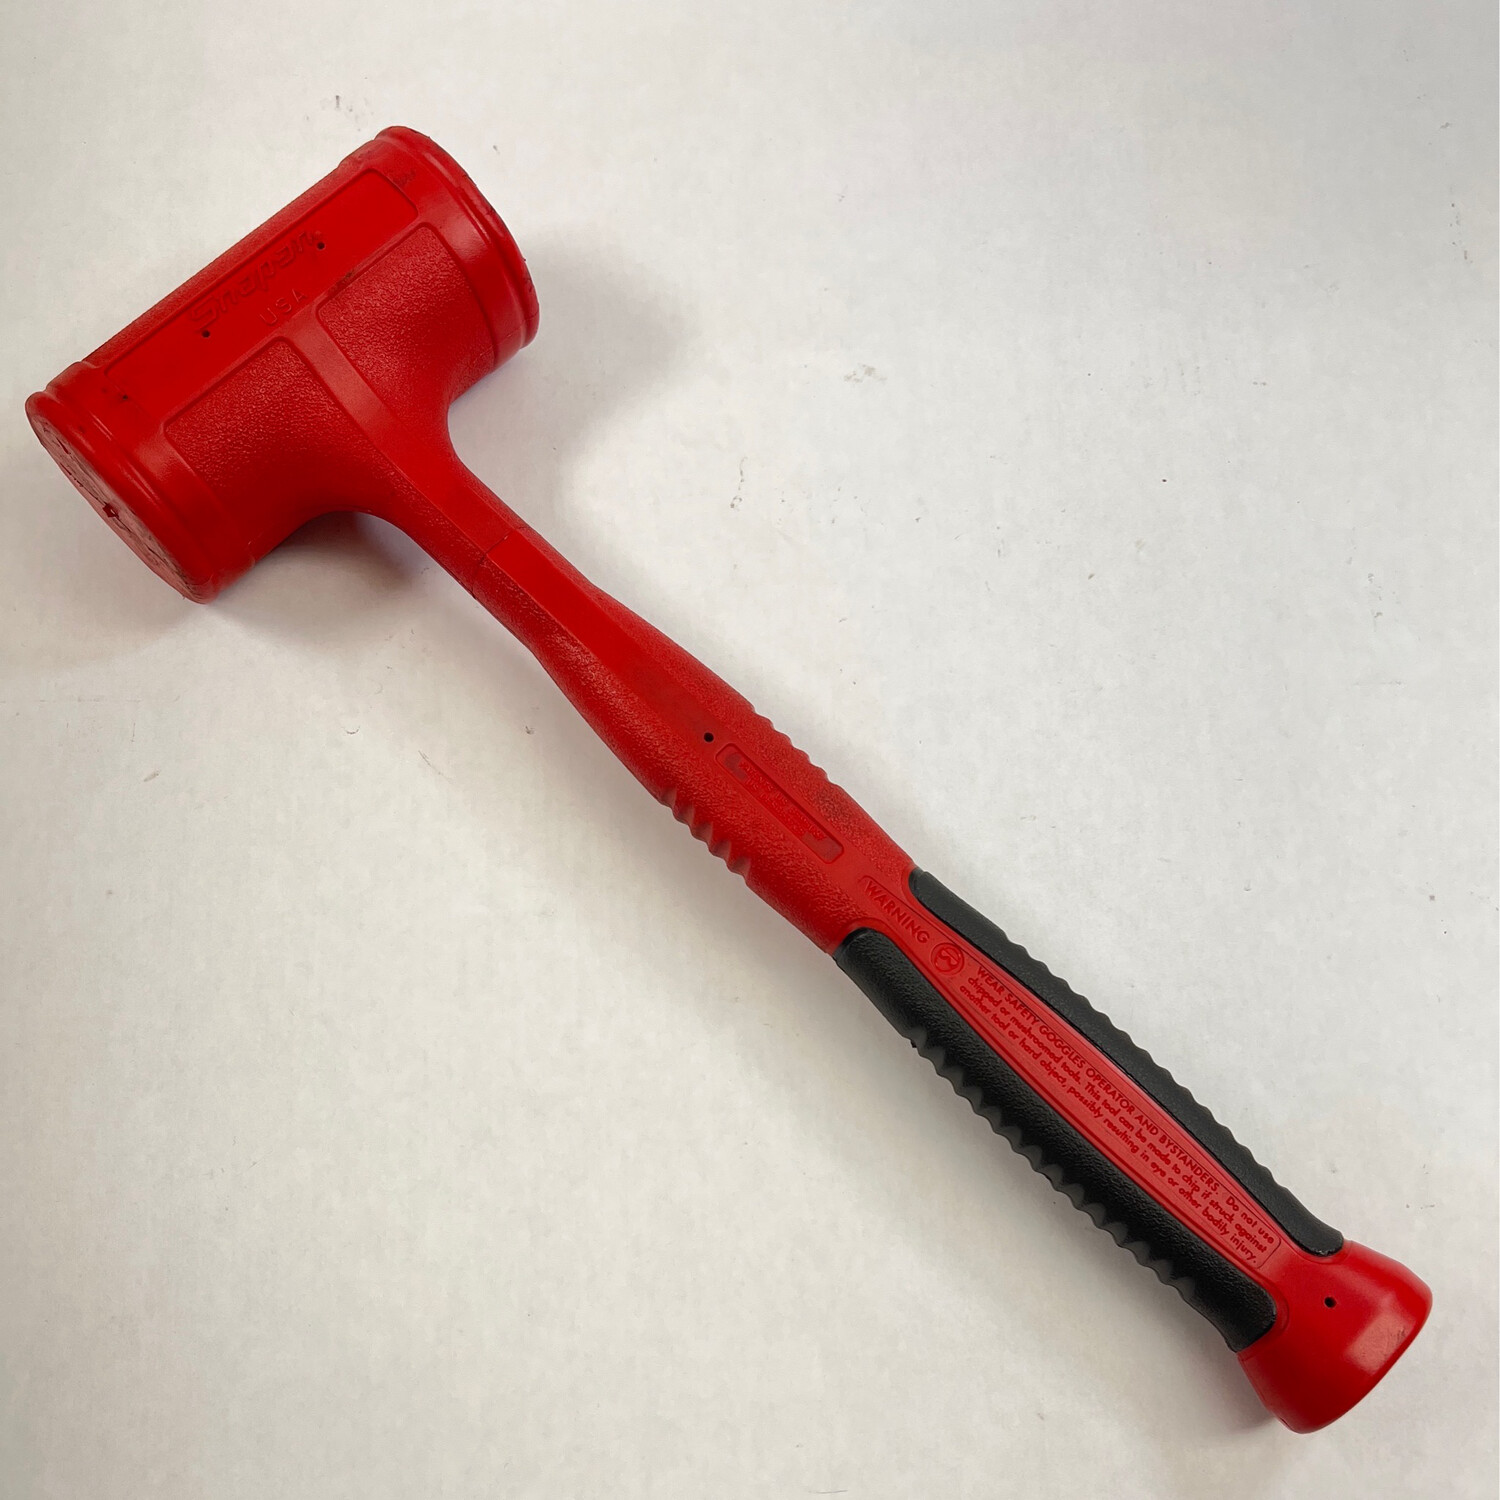 Snap On 48 oz Soft Grip Dead Blow Hammer, HBFE48